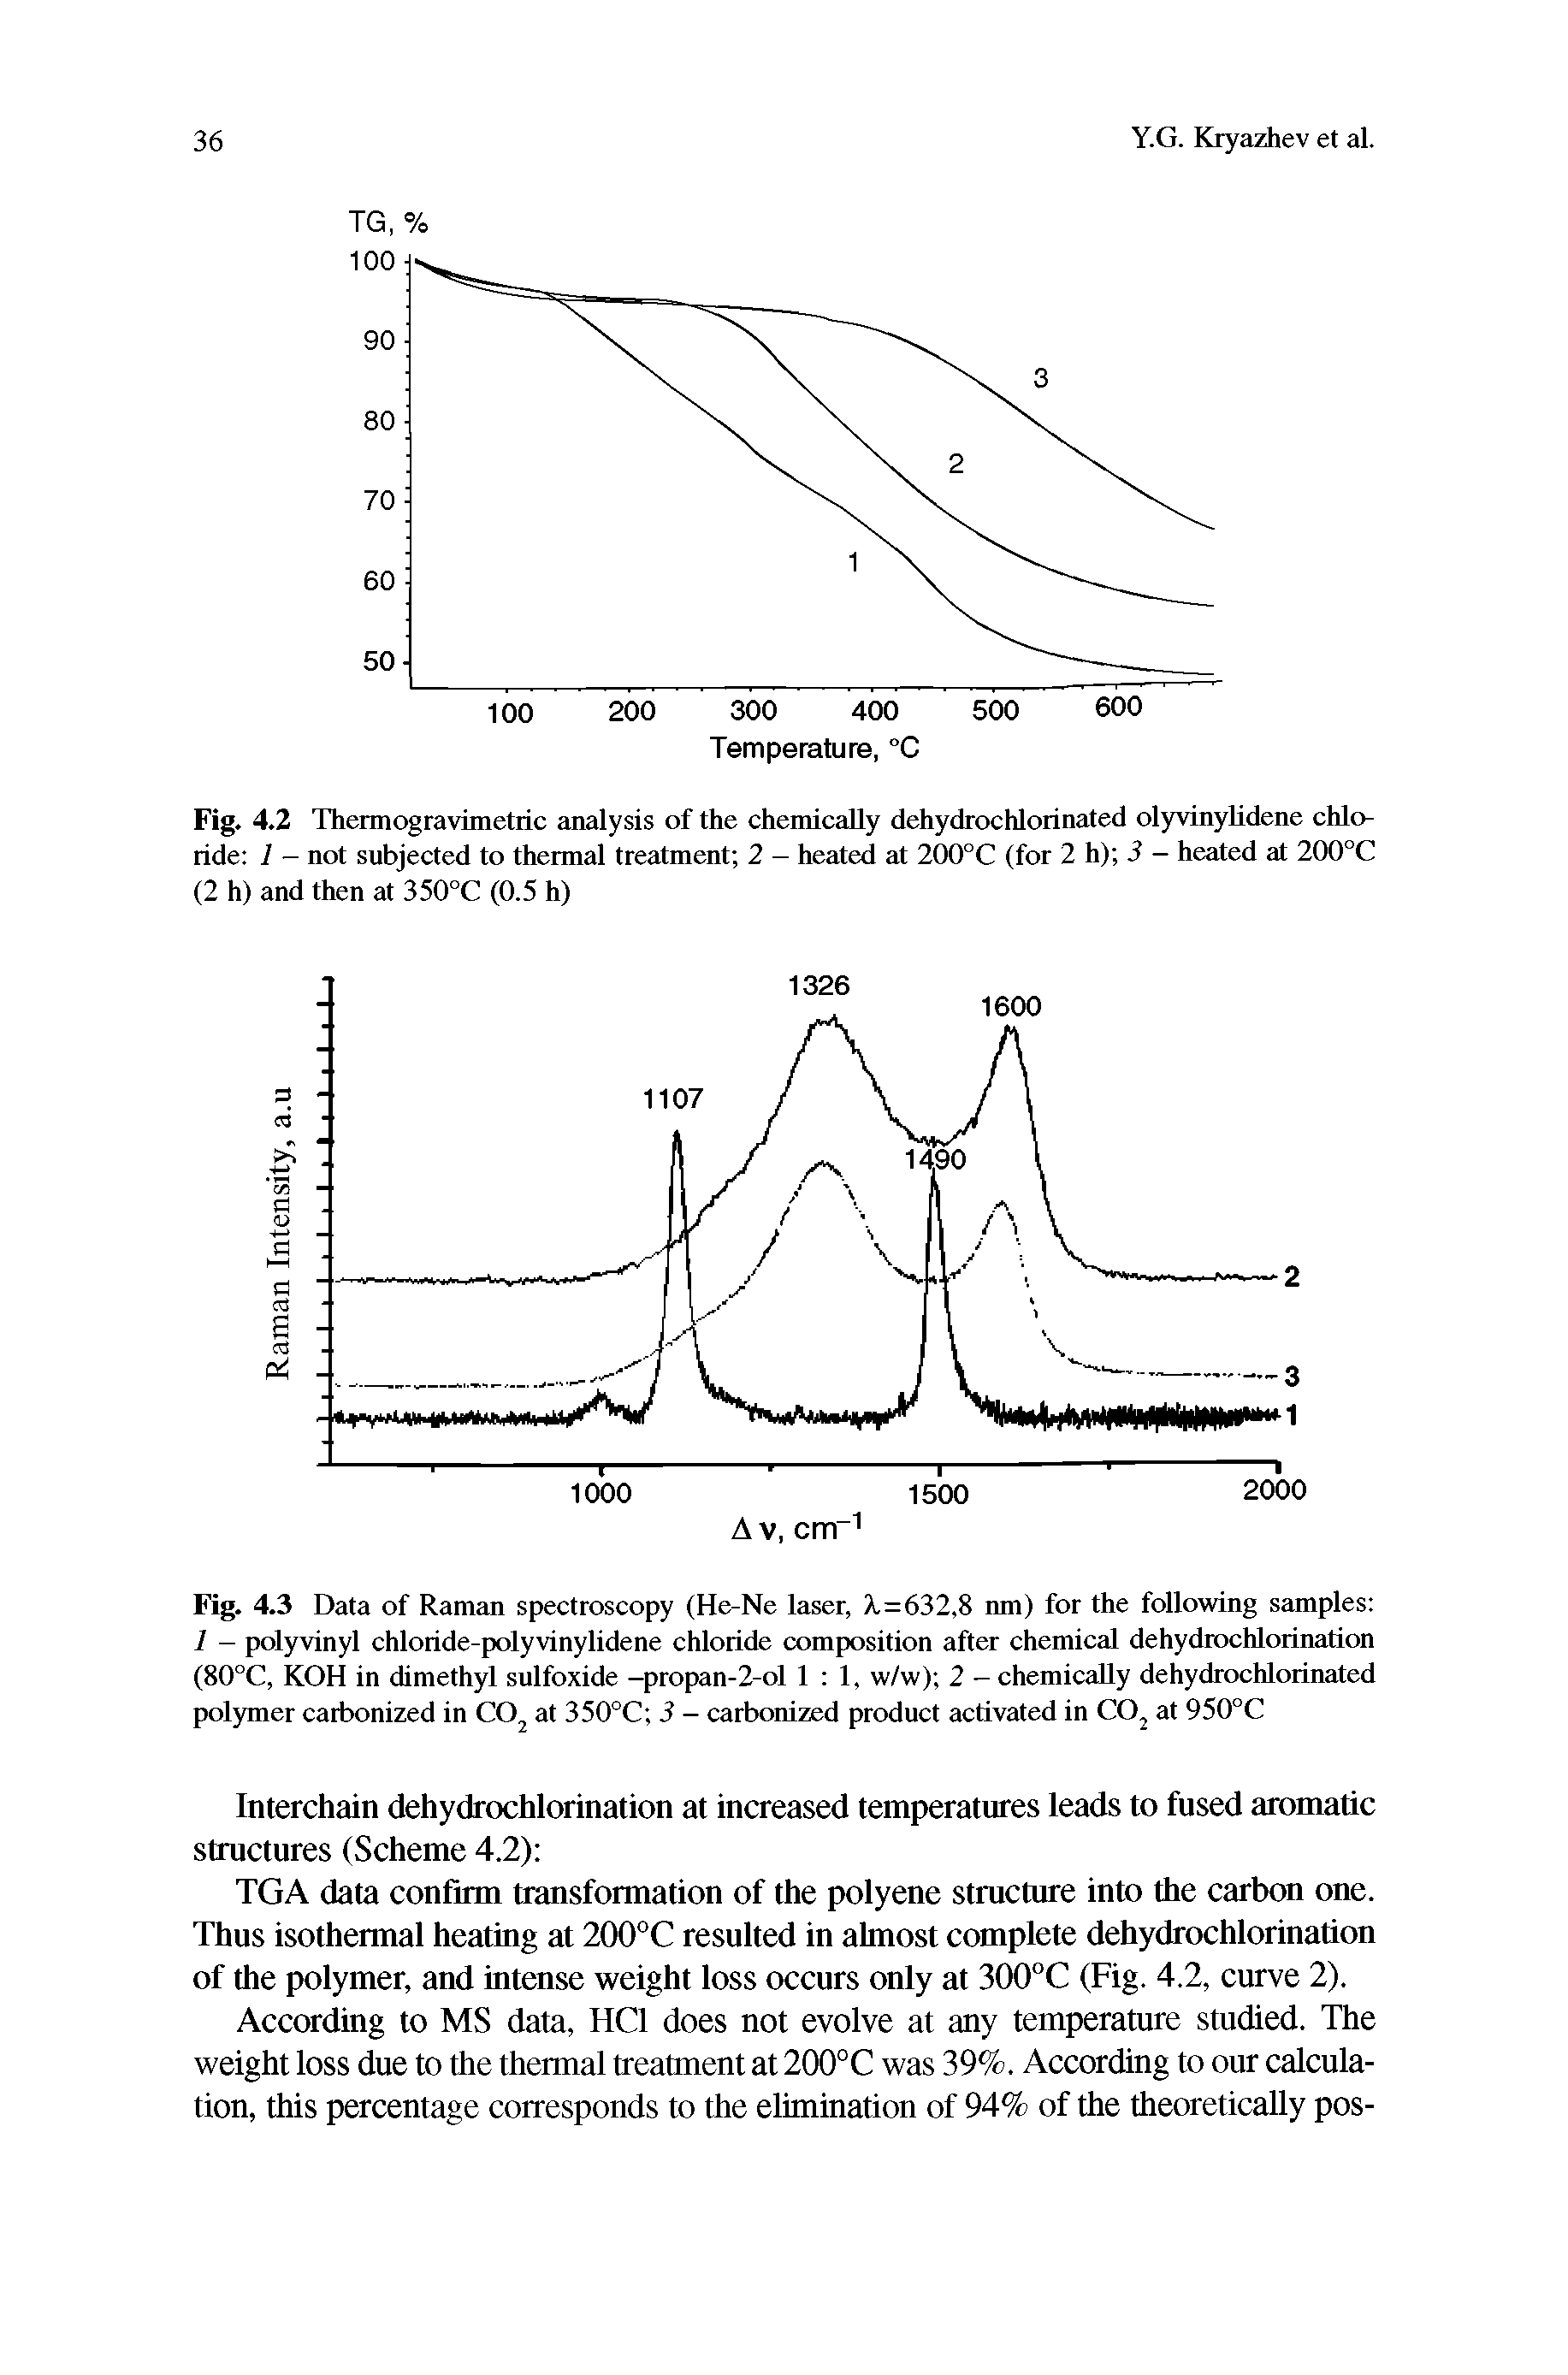 Fig. 4.2 Thermogravimetric analysis of the chemically dehydrochlorinated olyvinyUdene chloride 1 - not subjected to thermal treatment 2 - heated at 200°C (for 2 h) 3 - heated at 200°C (2 h) and then at 350°C (0.5 h)...